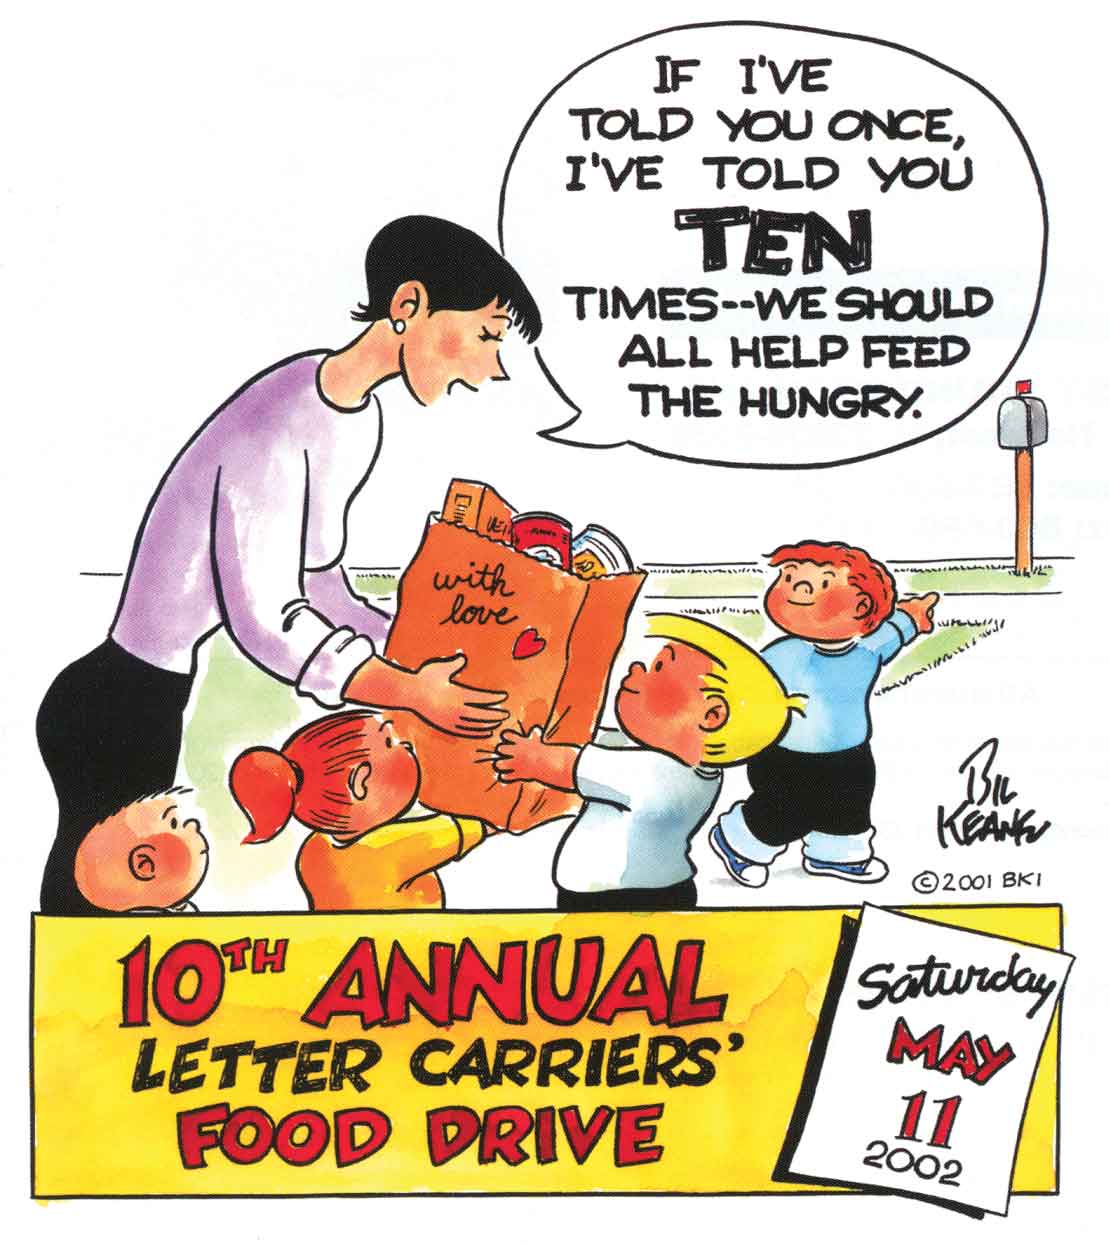 2002 Letter Carrier Food Drive is Saturday, May 11th